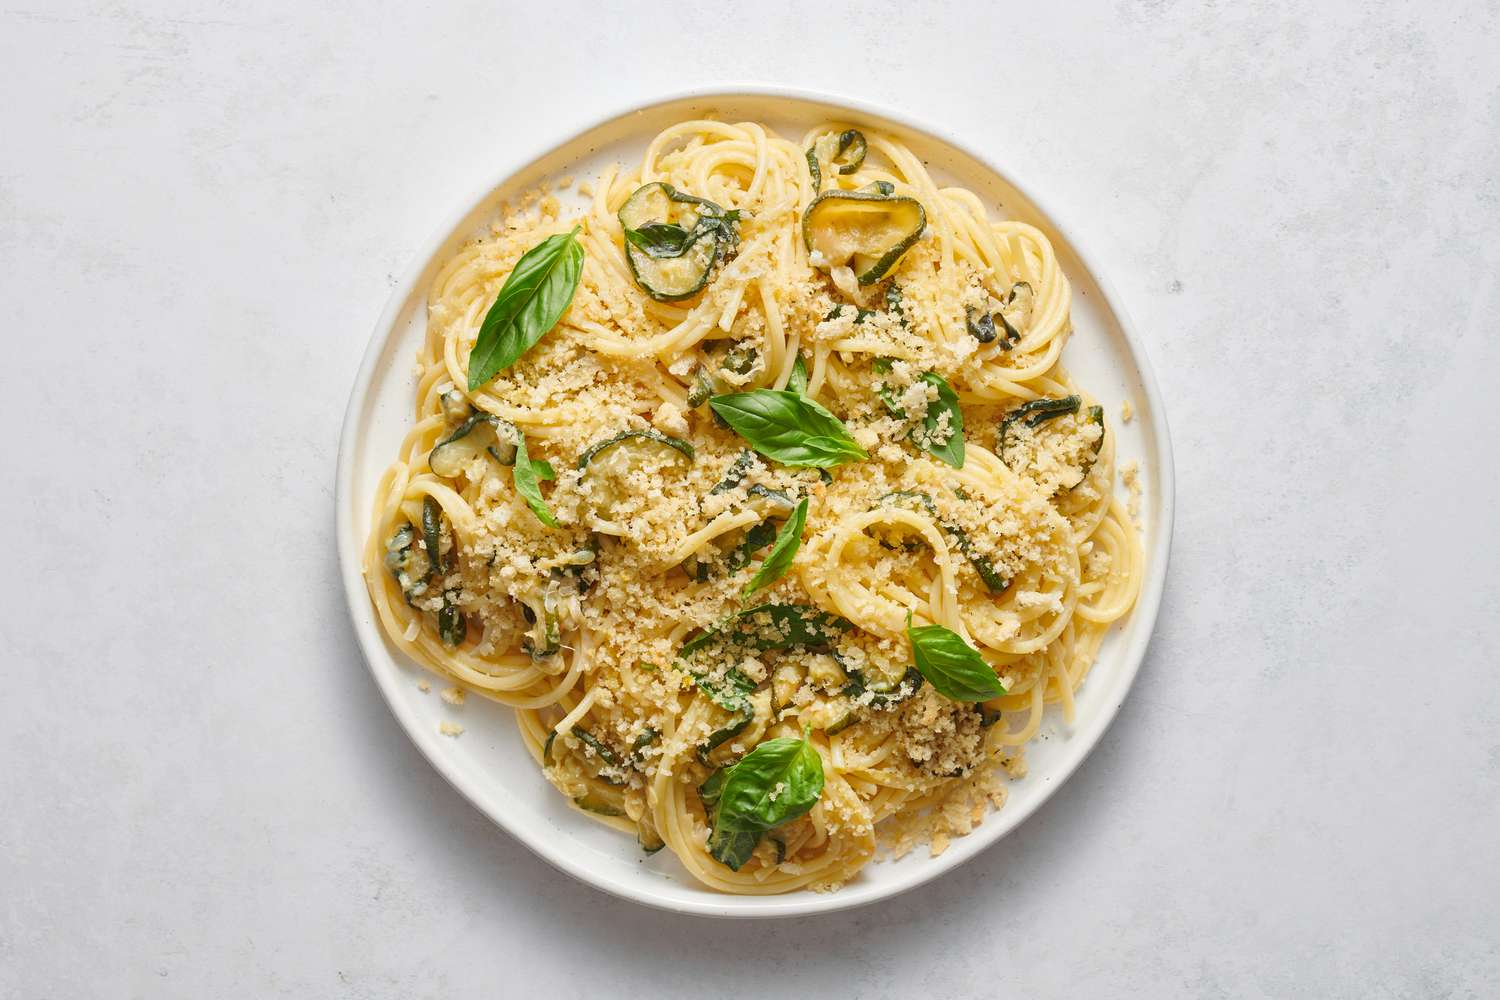 A large plate of caramelized zucchini pasta, topped with seasoned breadcrumbs and whole leaf basil